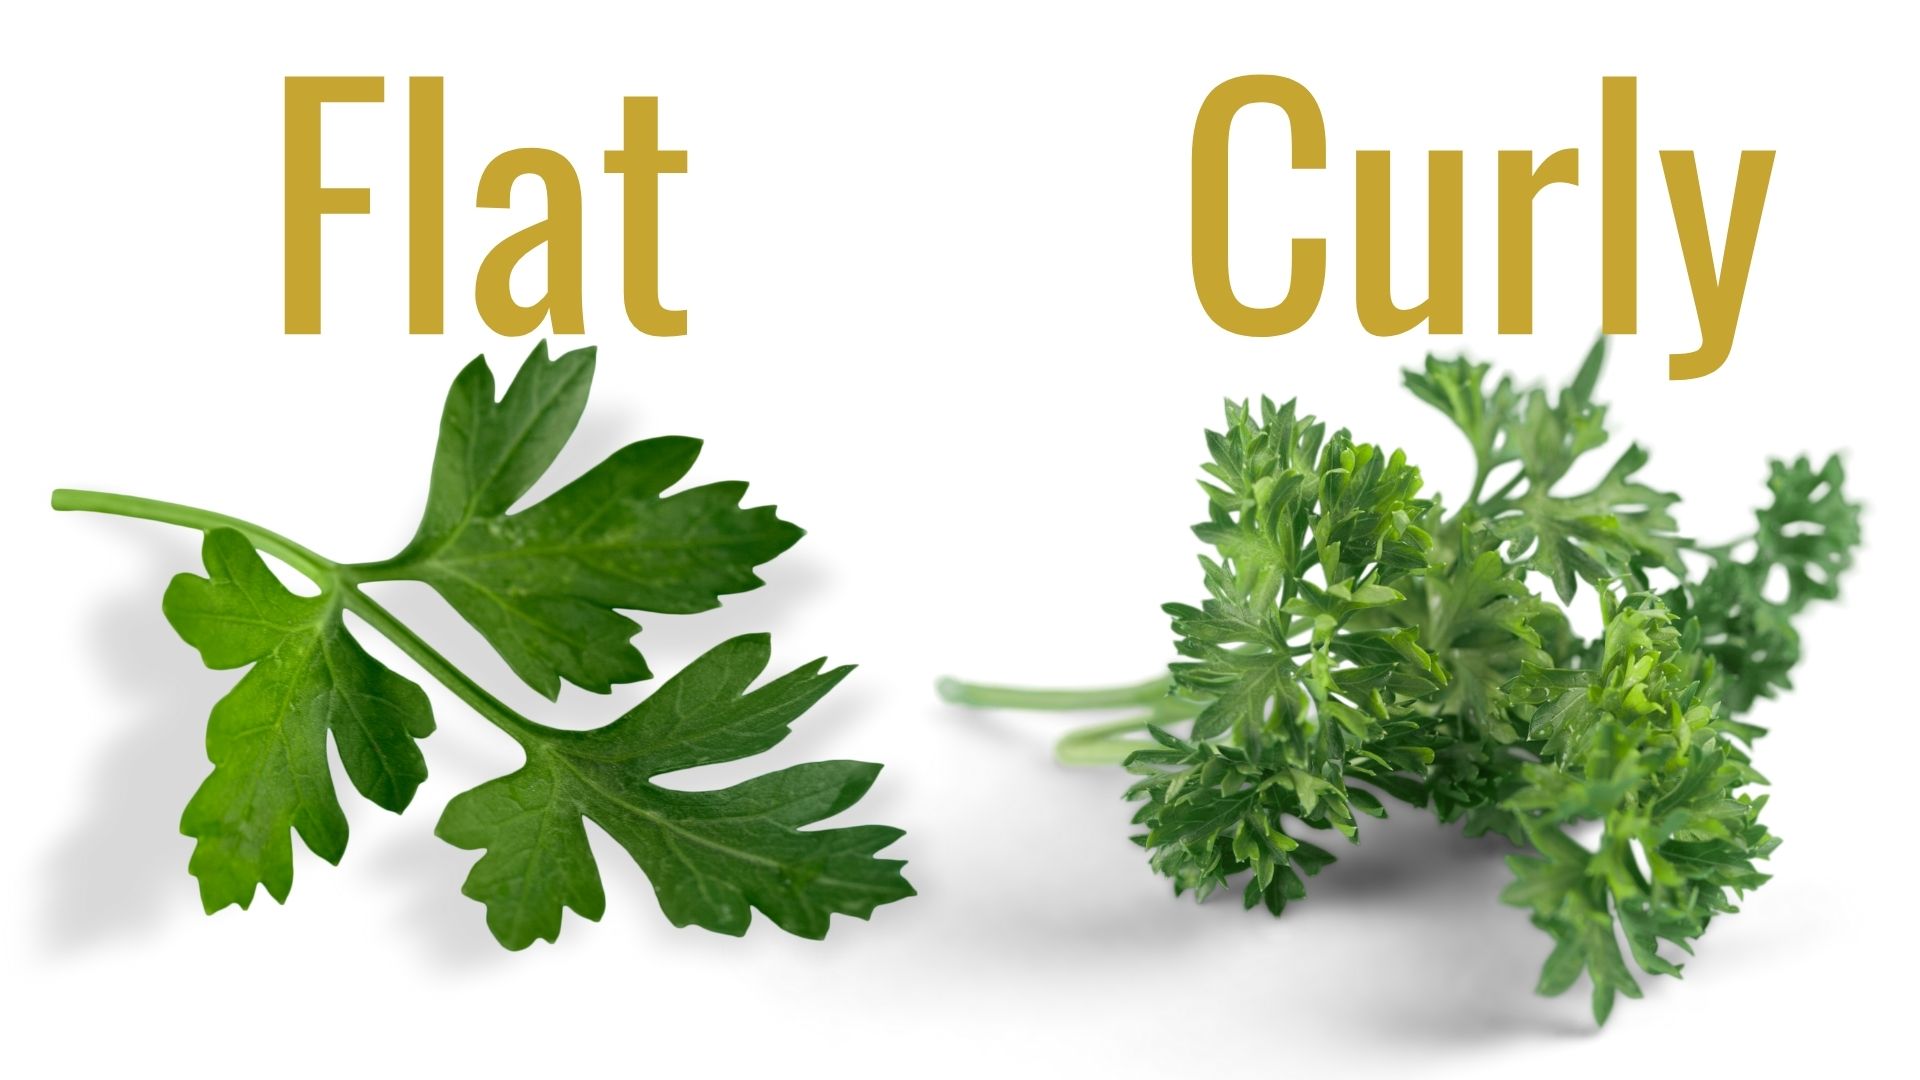 Parsley benefits for health from both flat leaf and curly leaf